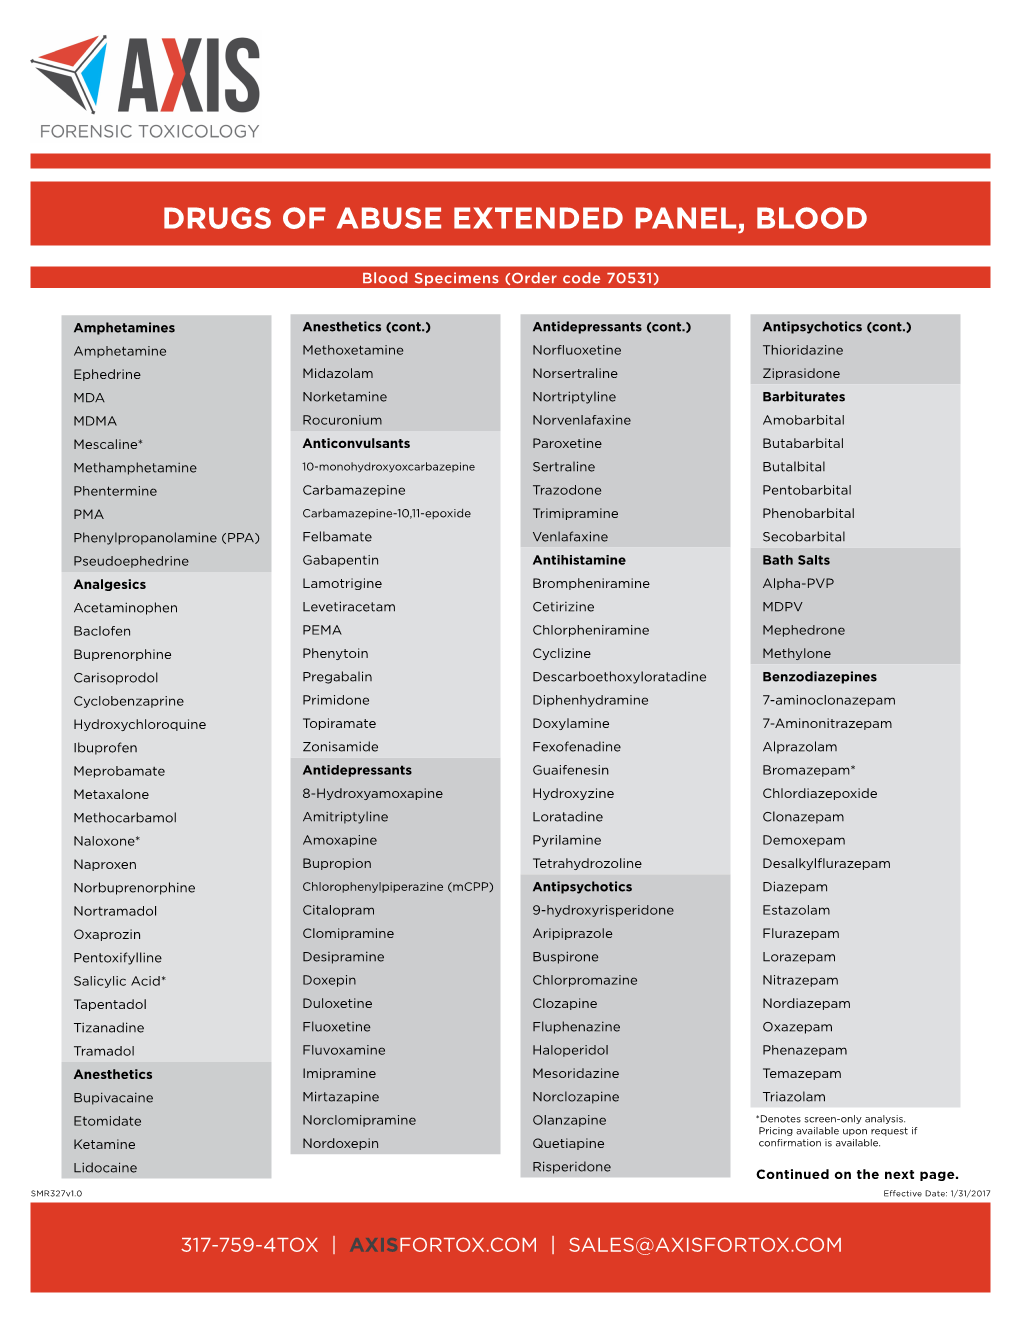 Drugs of Abuse Extended Panel, Blood